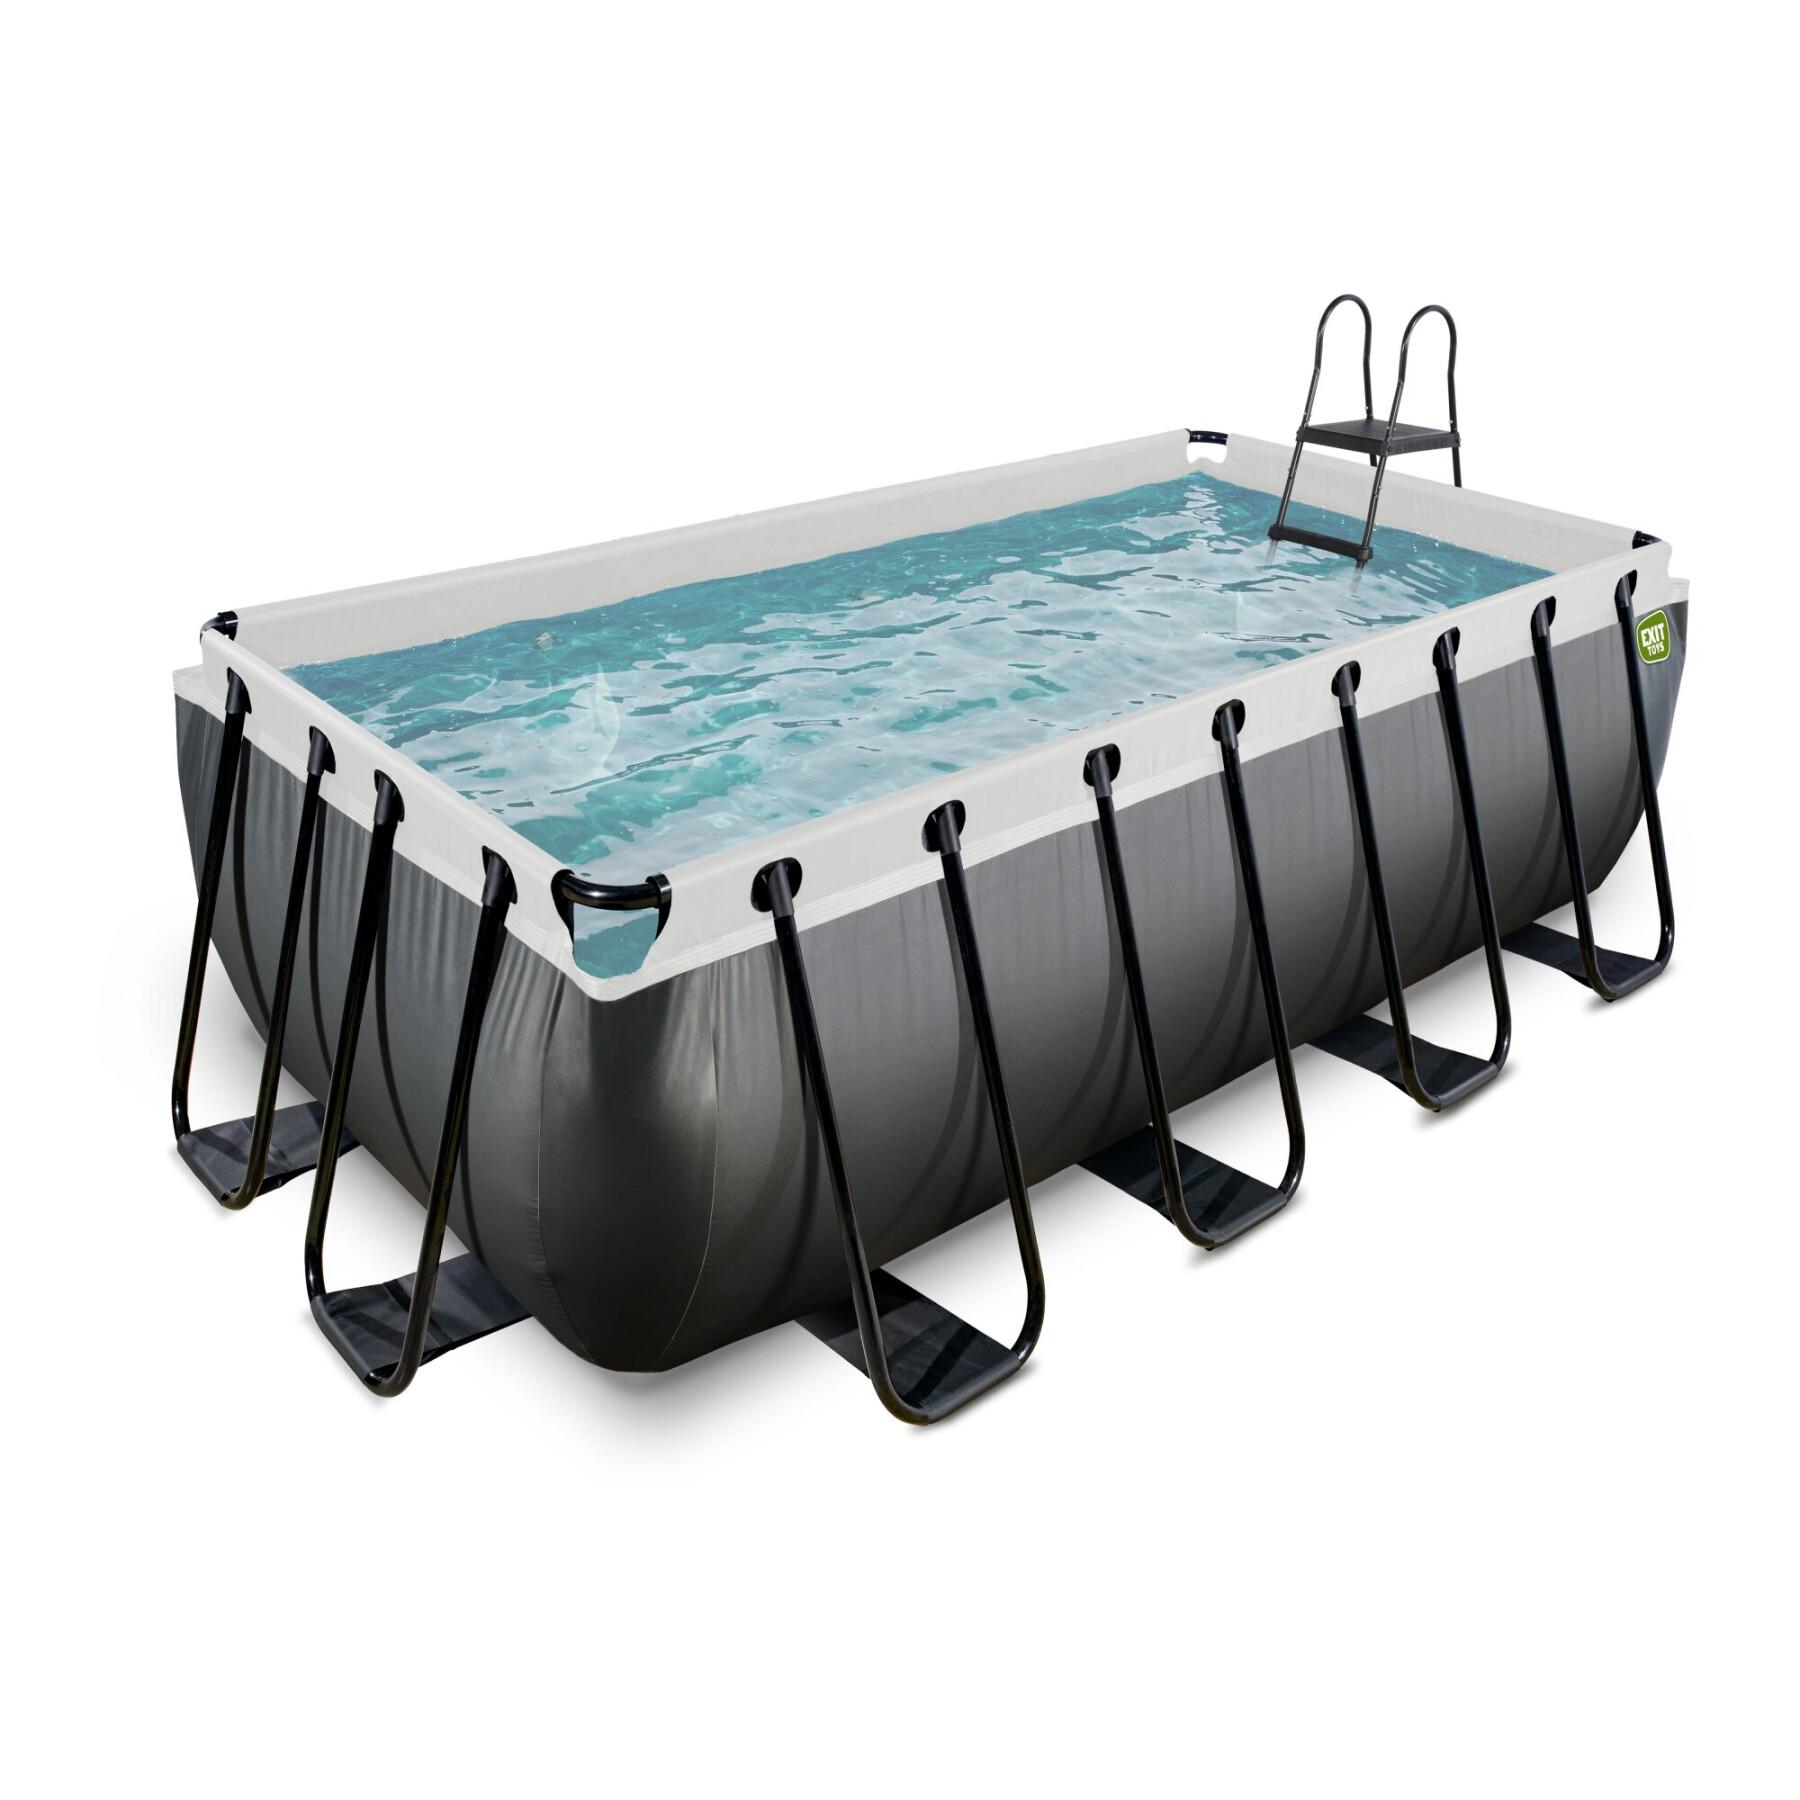 Swimming pool with sand filter pump in leather Exit Toys 400 x 200 x 122 cm